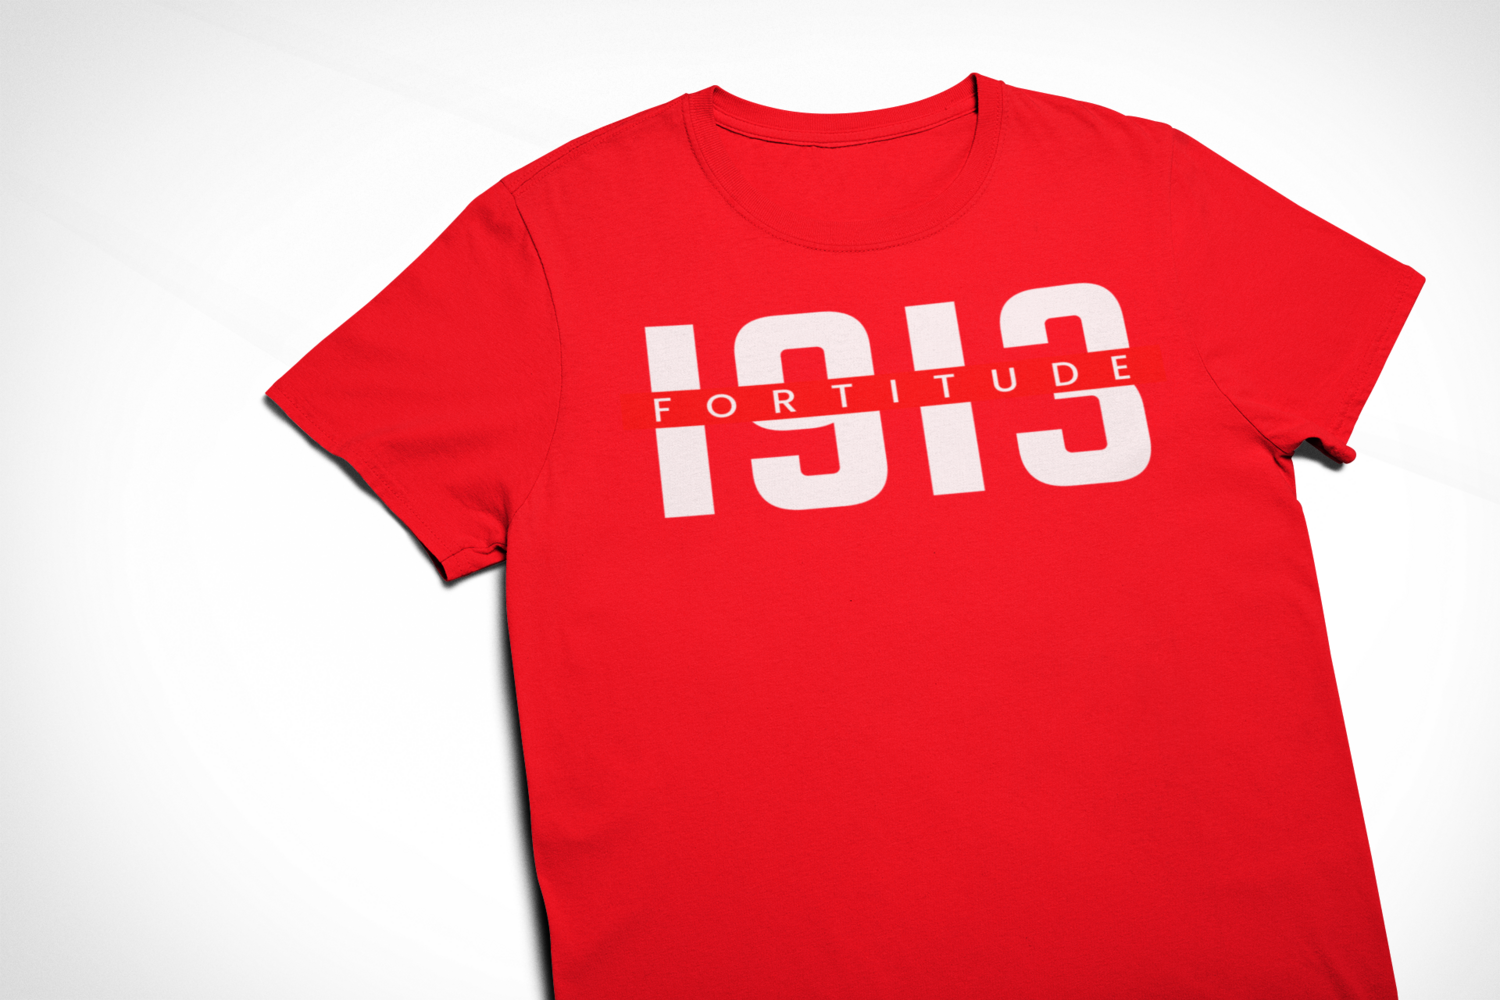 DST 1913 Fortitude Value T-Shirt by Afflatus